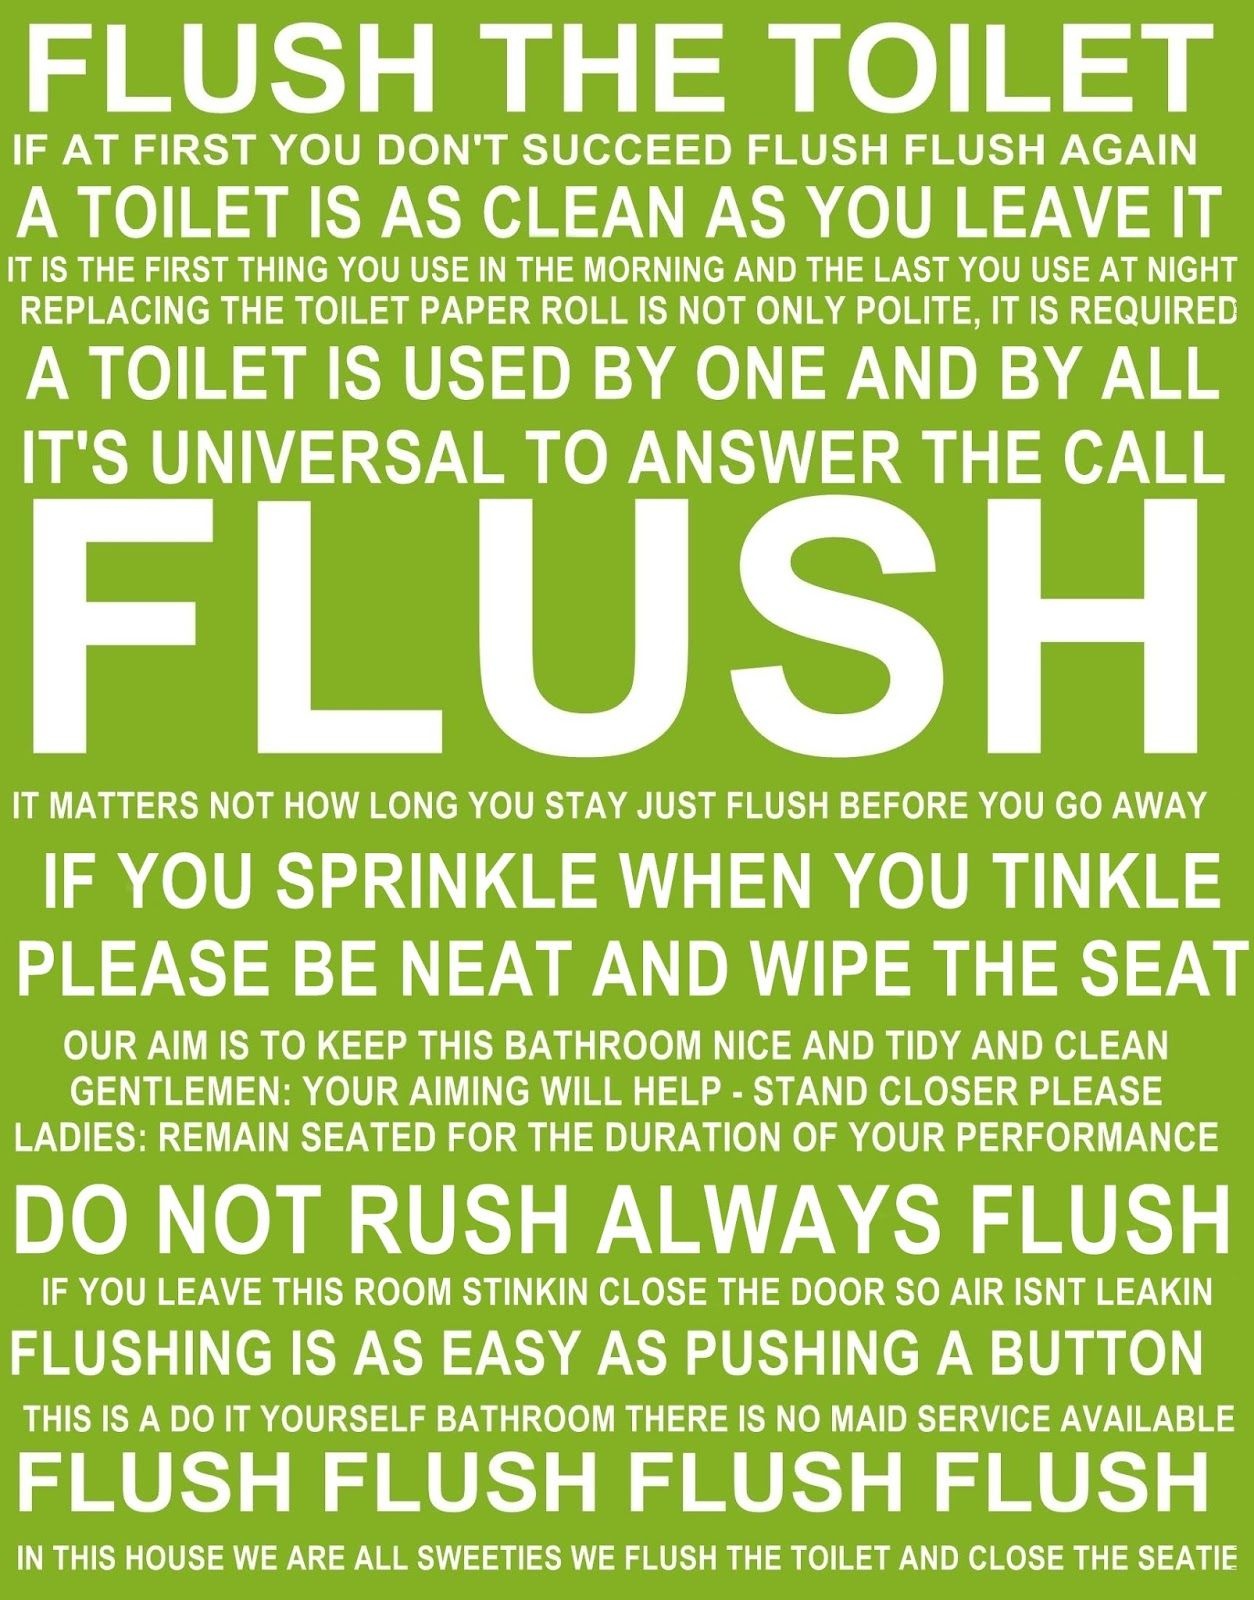 Flush The Toilet Quotes And Sayings Free Printable | Bathroom - Free Printable Do Not Flush Signs